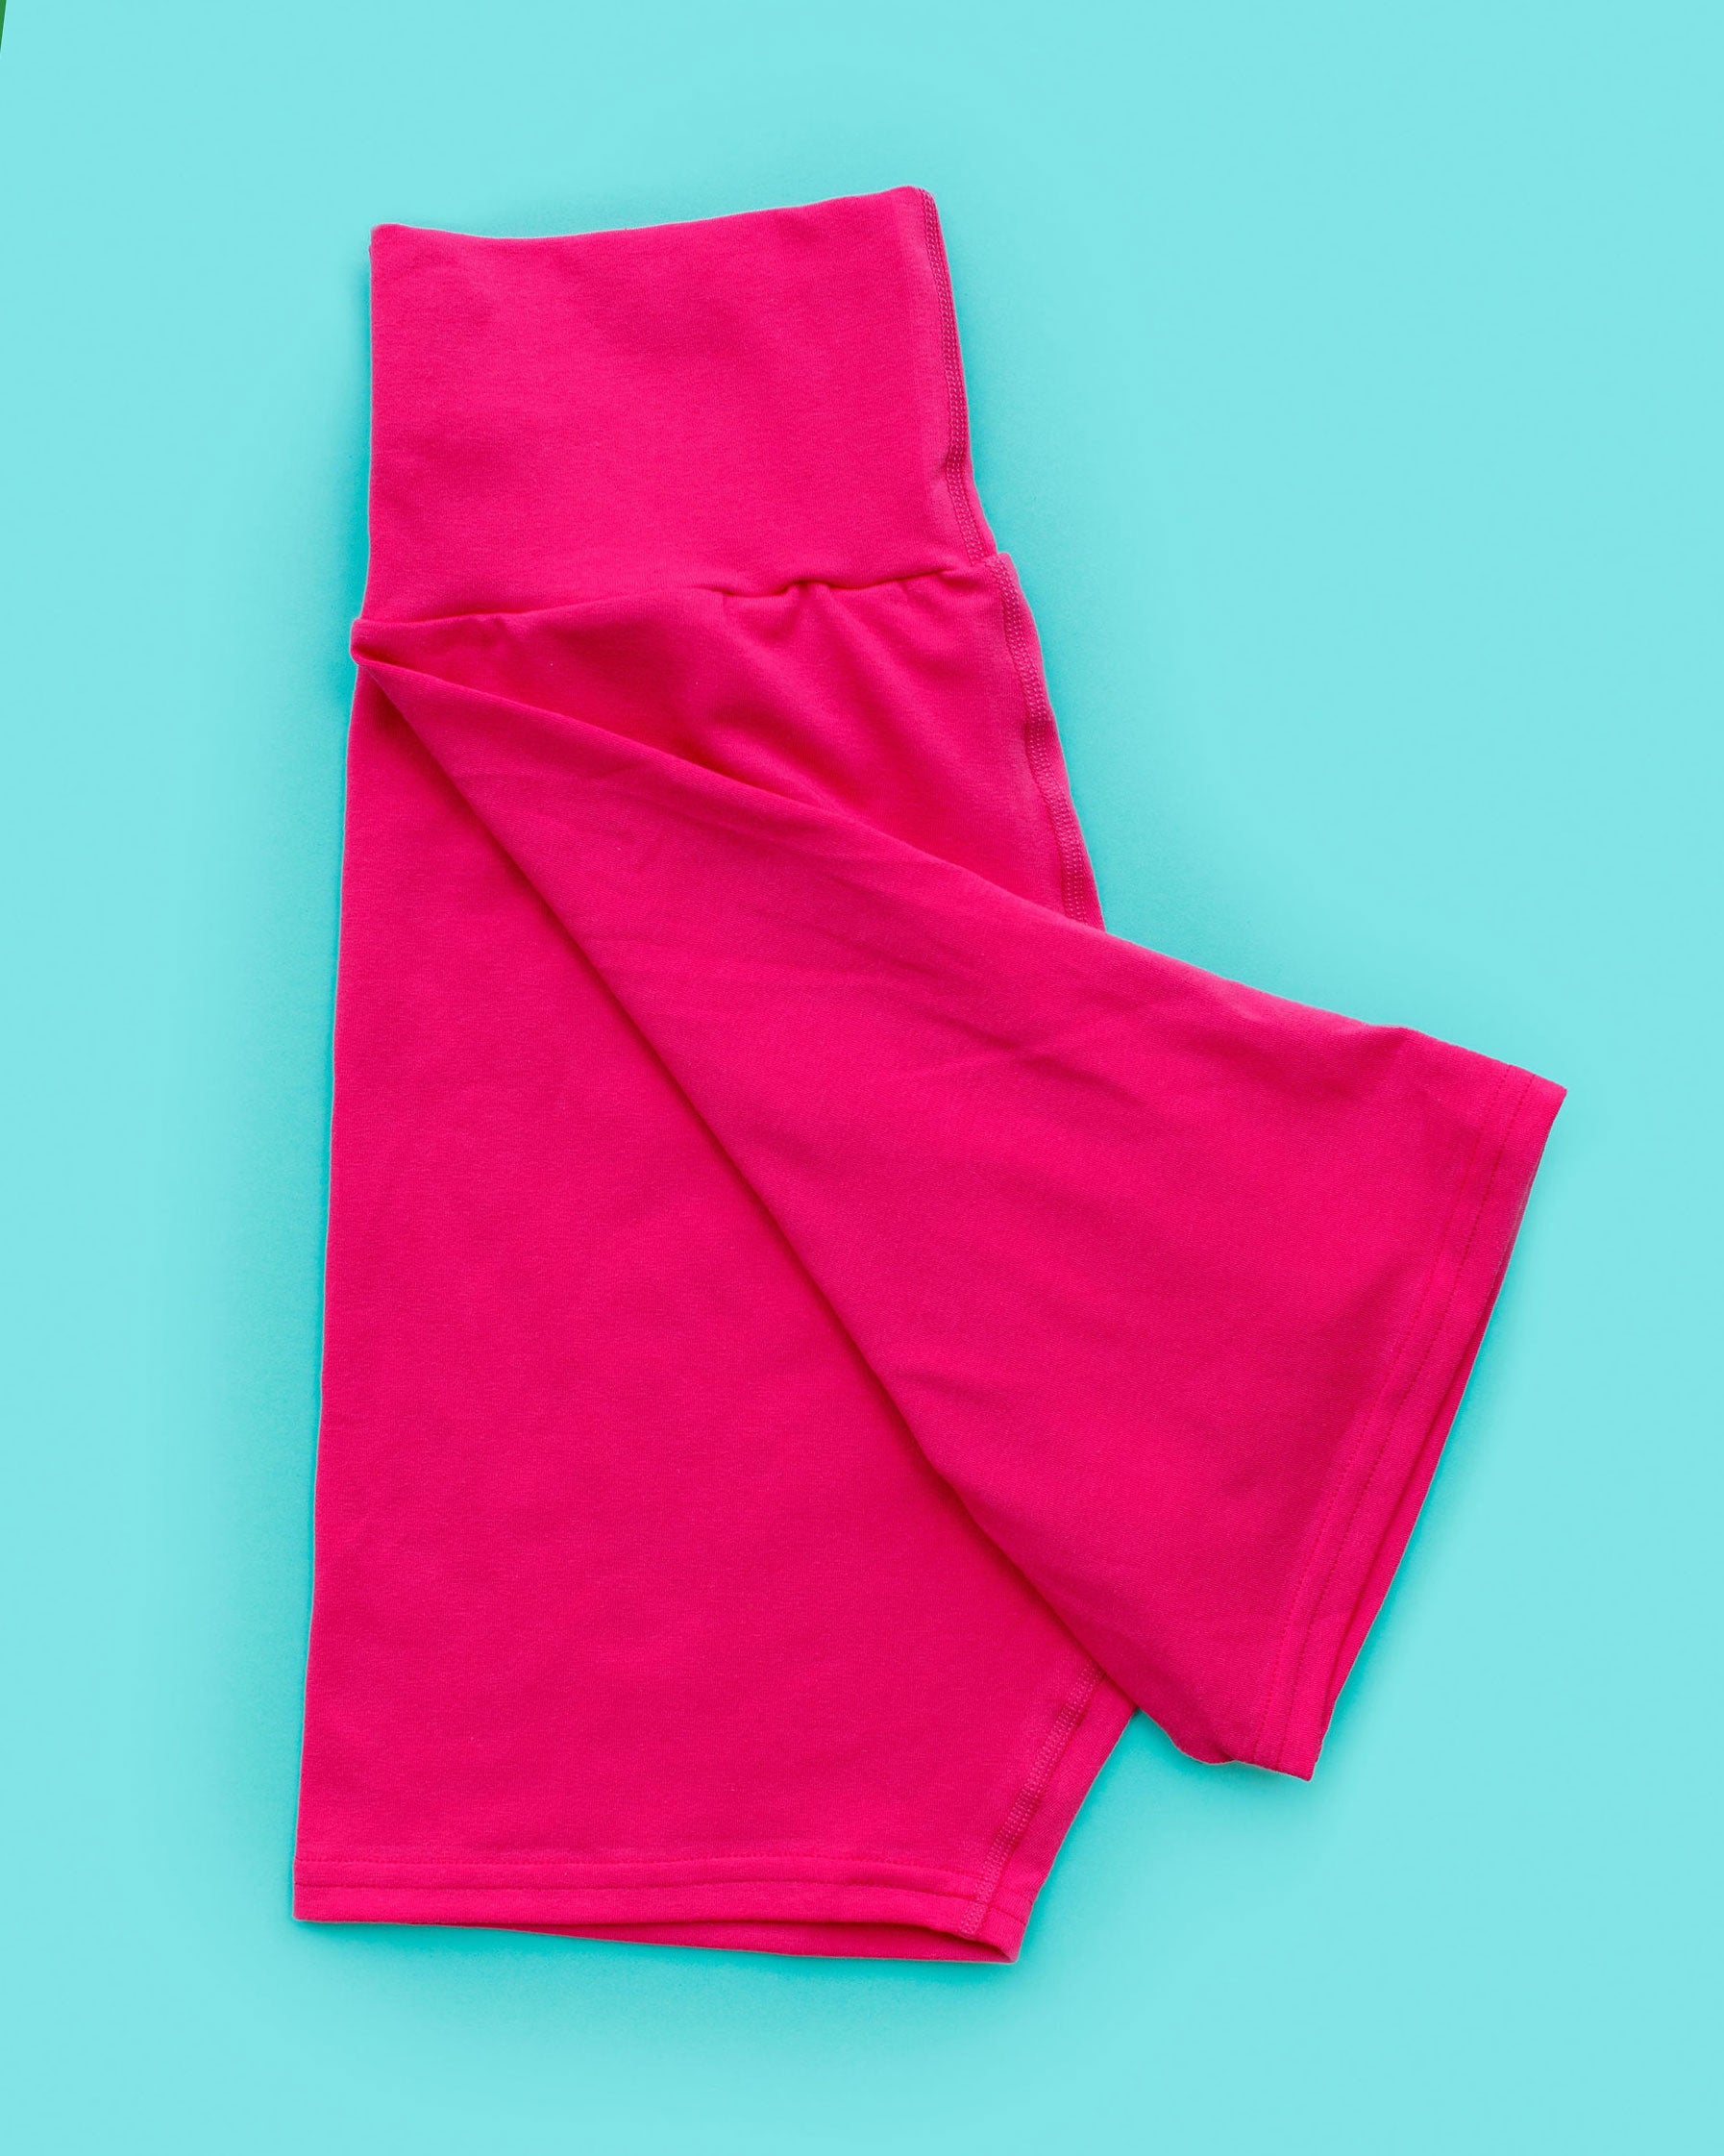 Flat lay of Thunderpants Bike Shorts in a hot pink color.